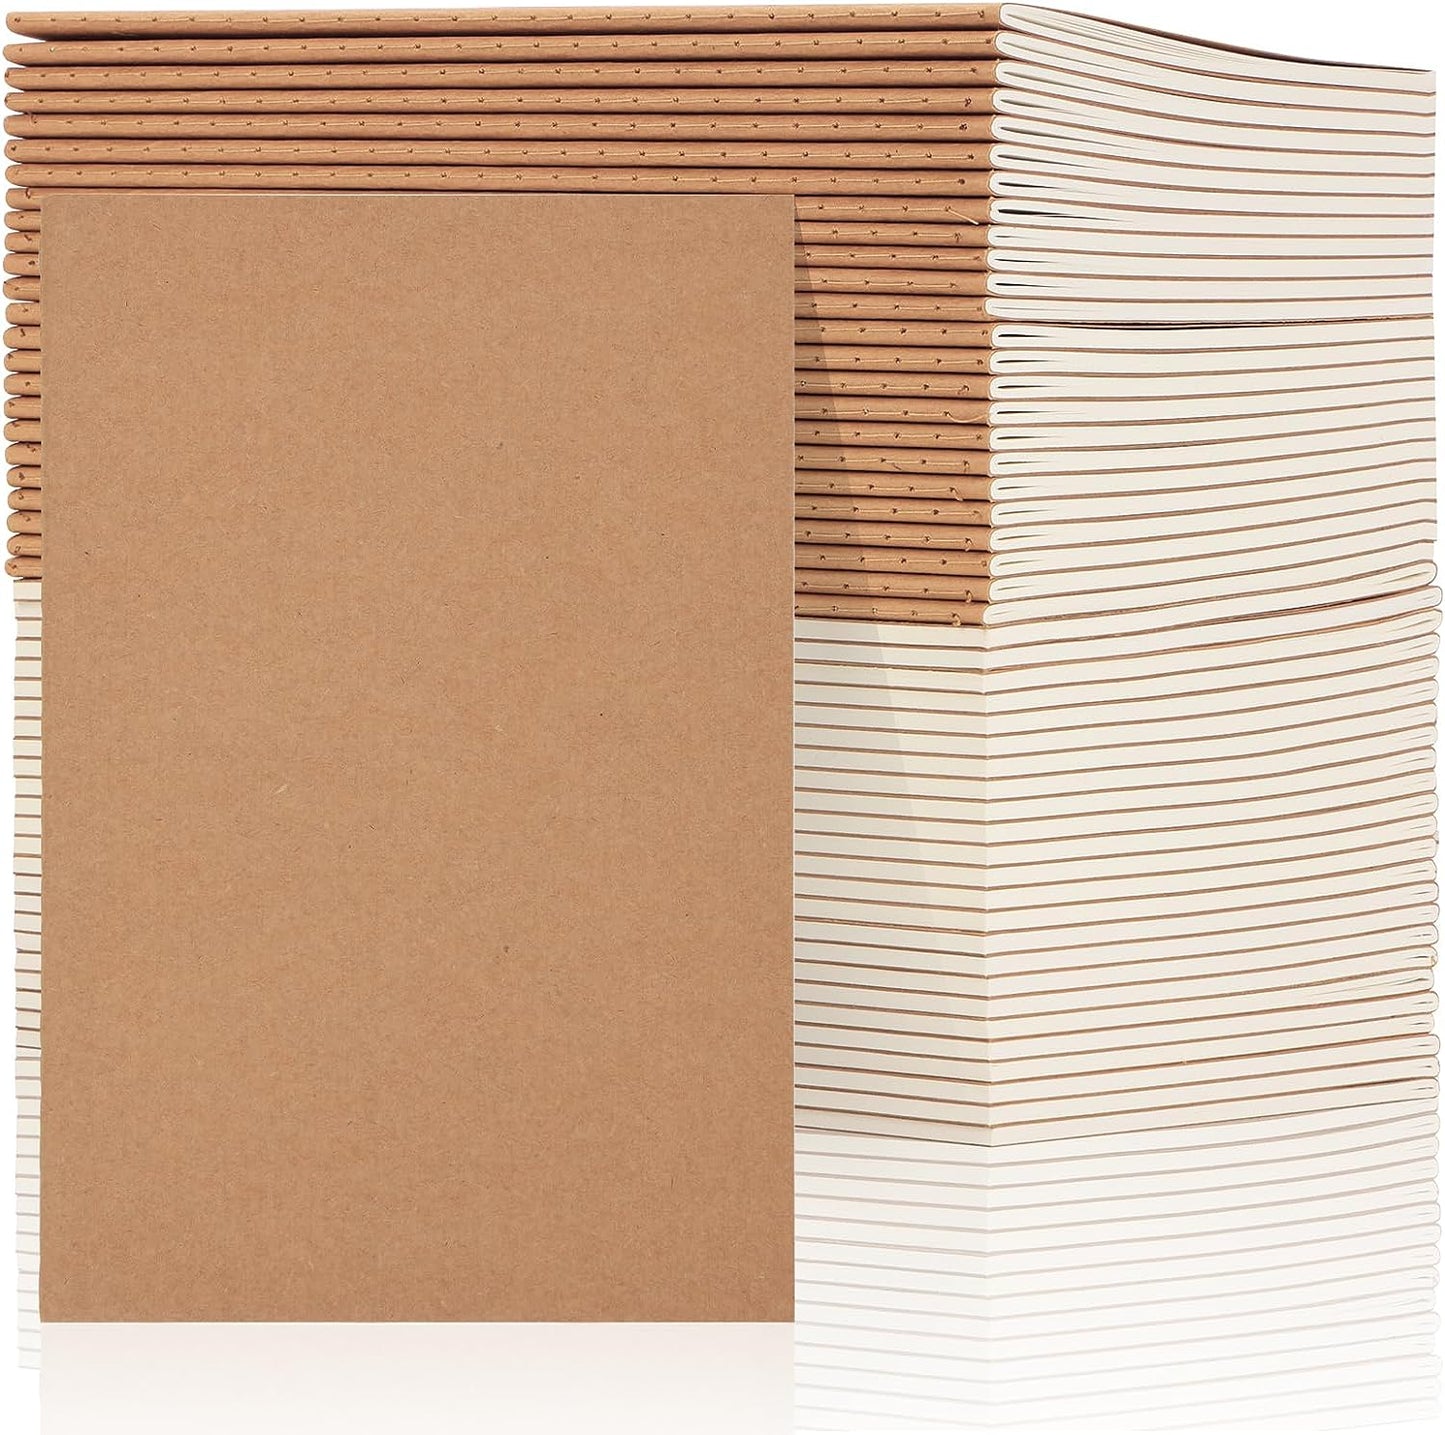 24 Pack Kraft Notebooks, Journals in Bulk for Writing, Blank Paper Sketchbooks, 60 Pages Composition Notebook, 8.3X5.5 Inch, A5 Size, Travel Journal Set, for Gifts, Students and Office Supplies